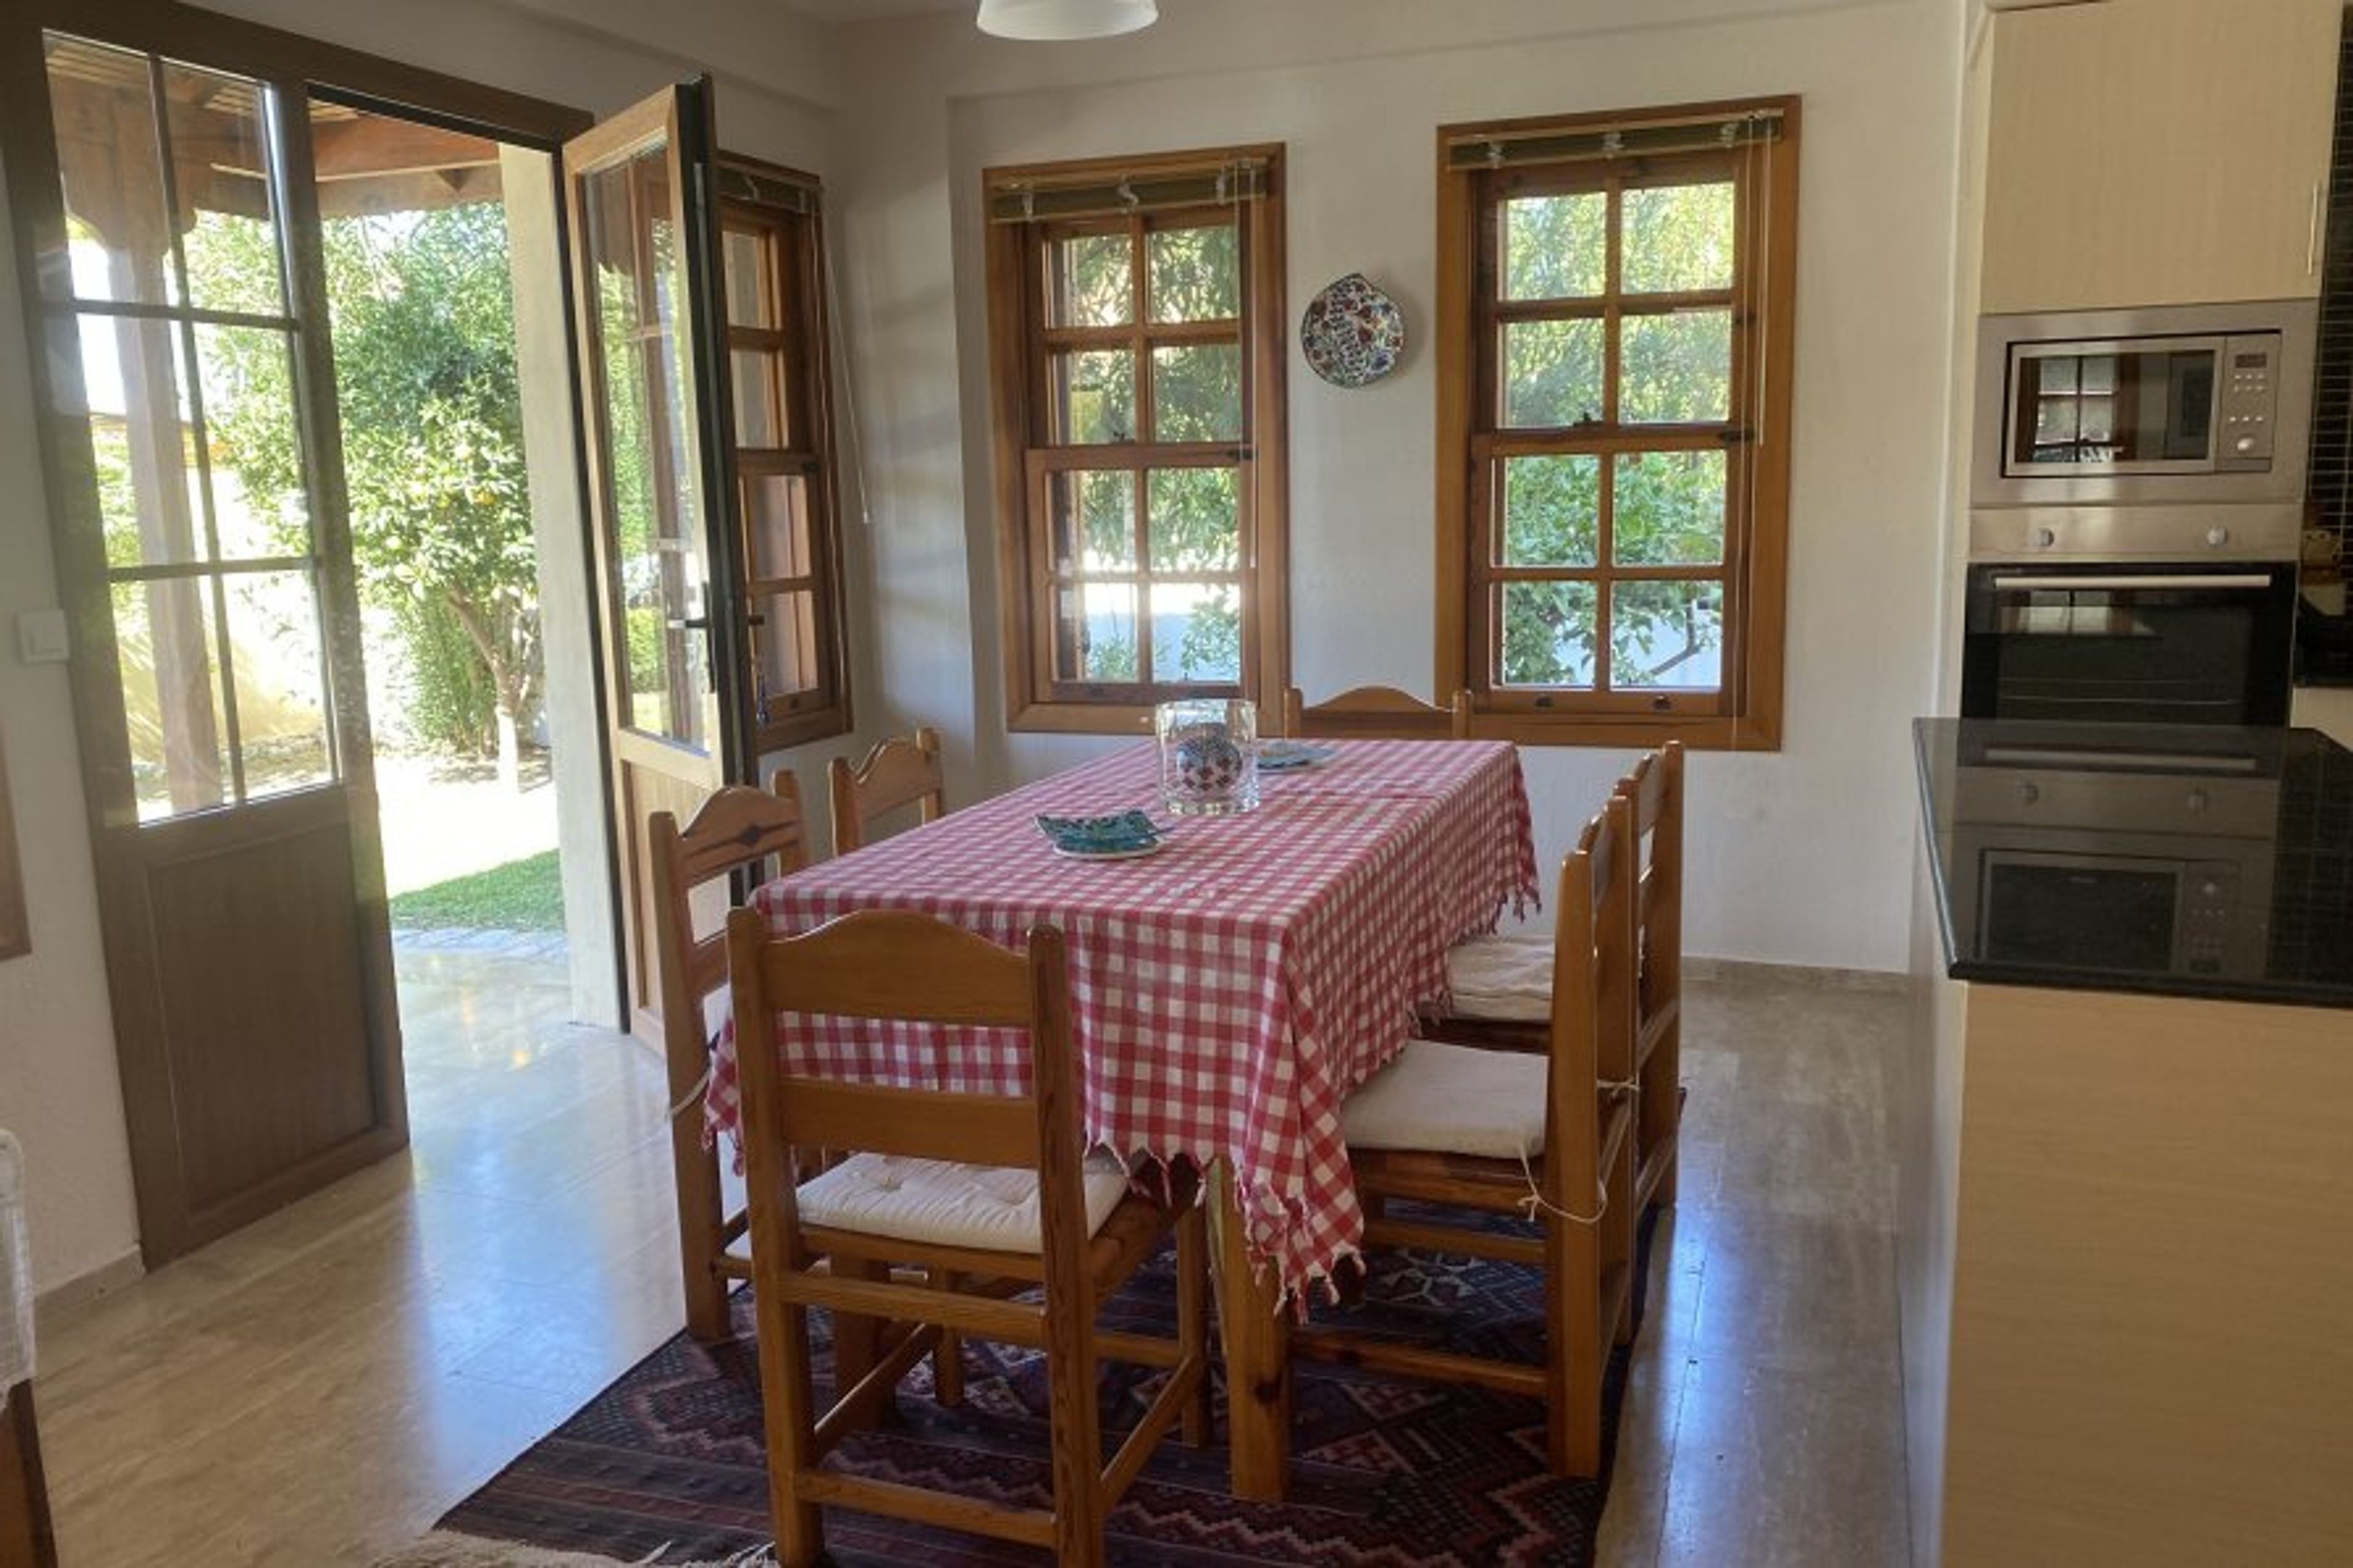 Dining area with doors onto the terrace